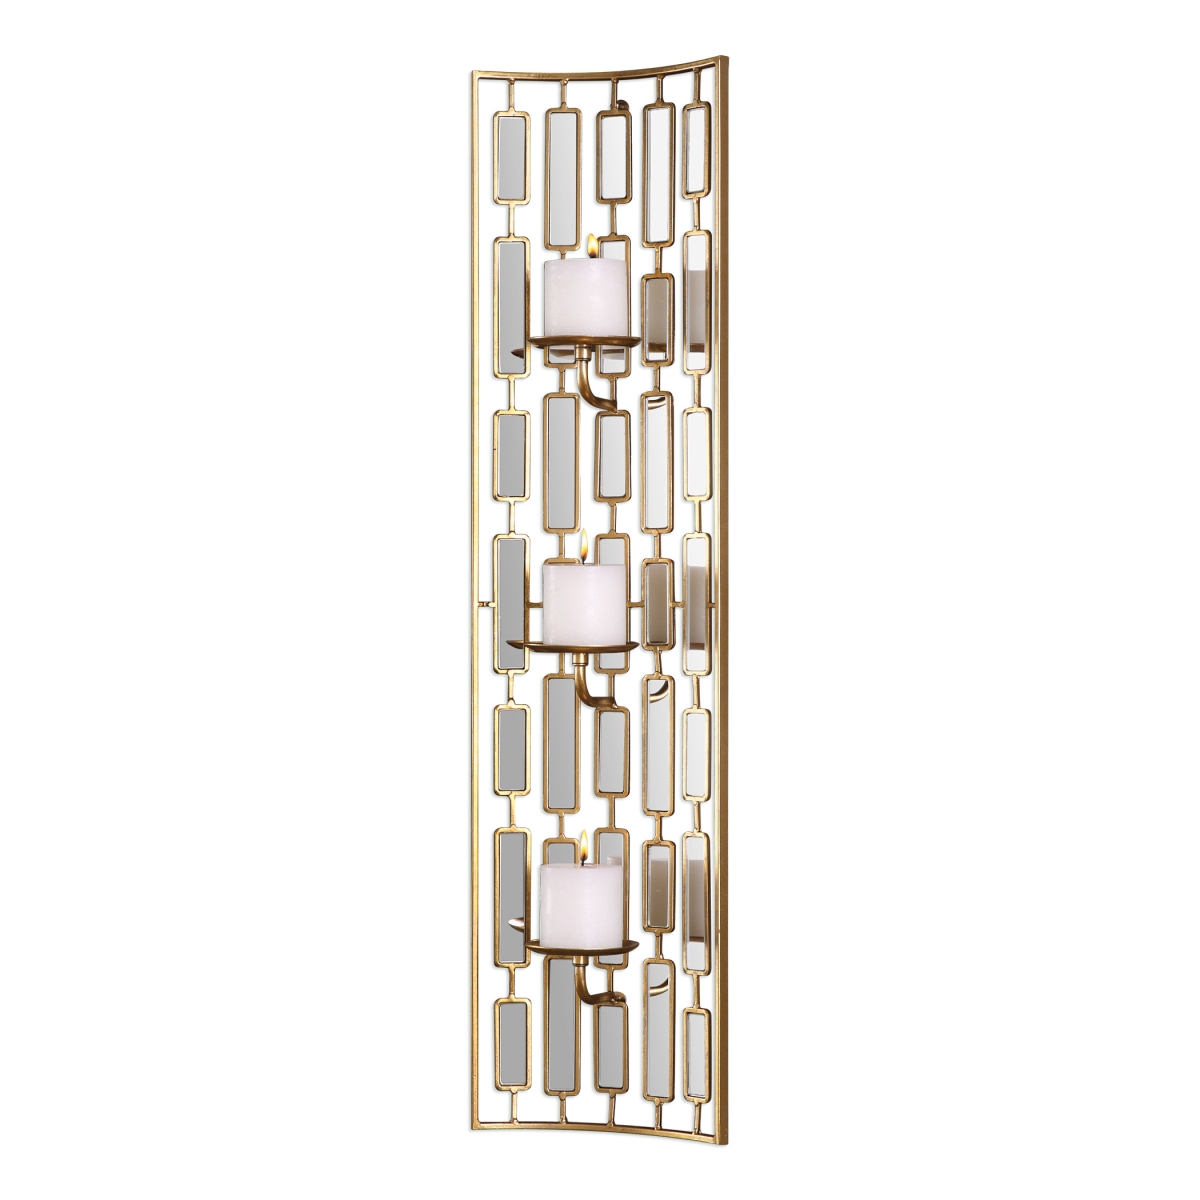 Picture of 212 Main 04045 Loire Mirrored Wall Sconce